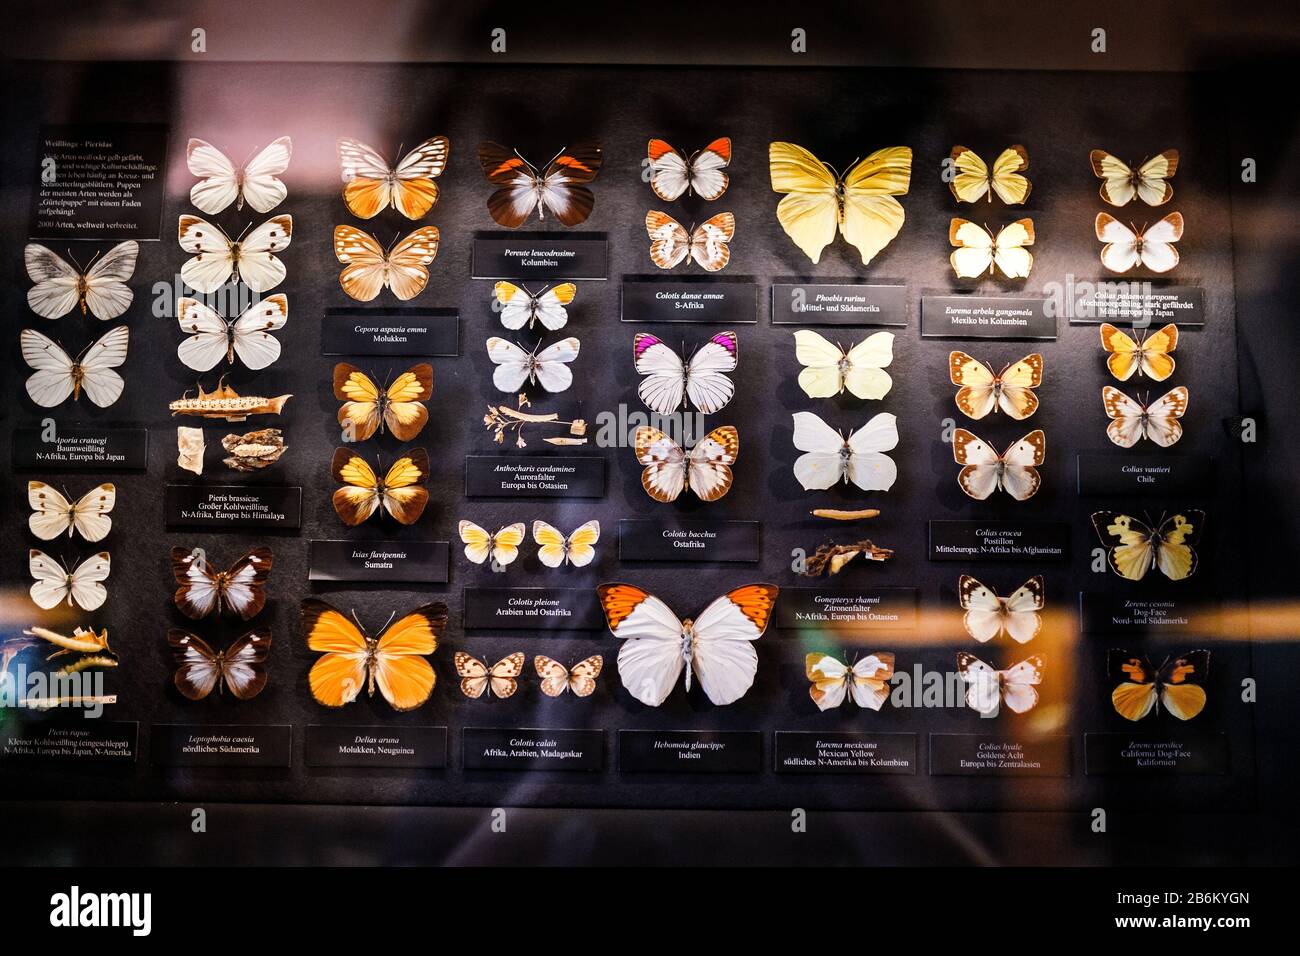 24 MARCH 2017, VIENNA, MUSEUM OF NATURAL HISTORY, AUSTRIA: museum collection of different butterfly Stock Photo